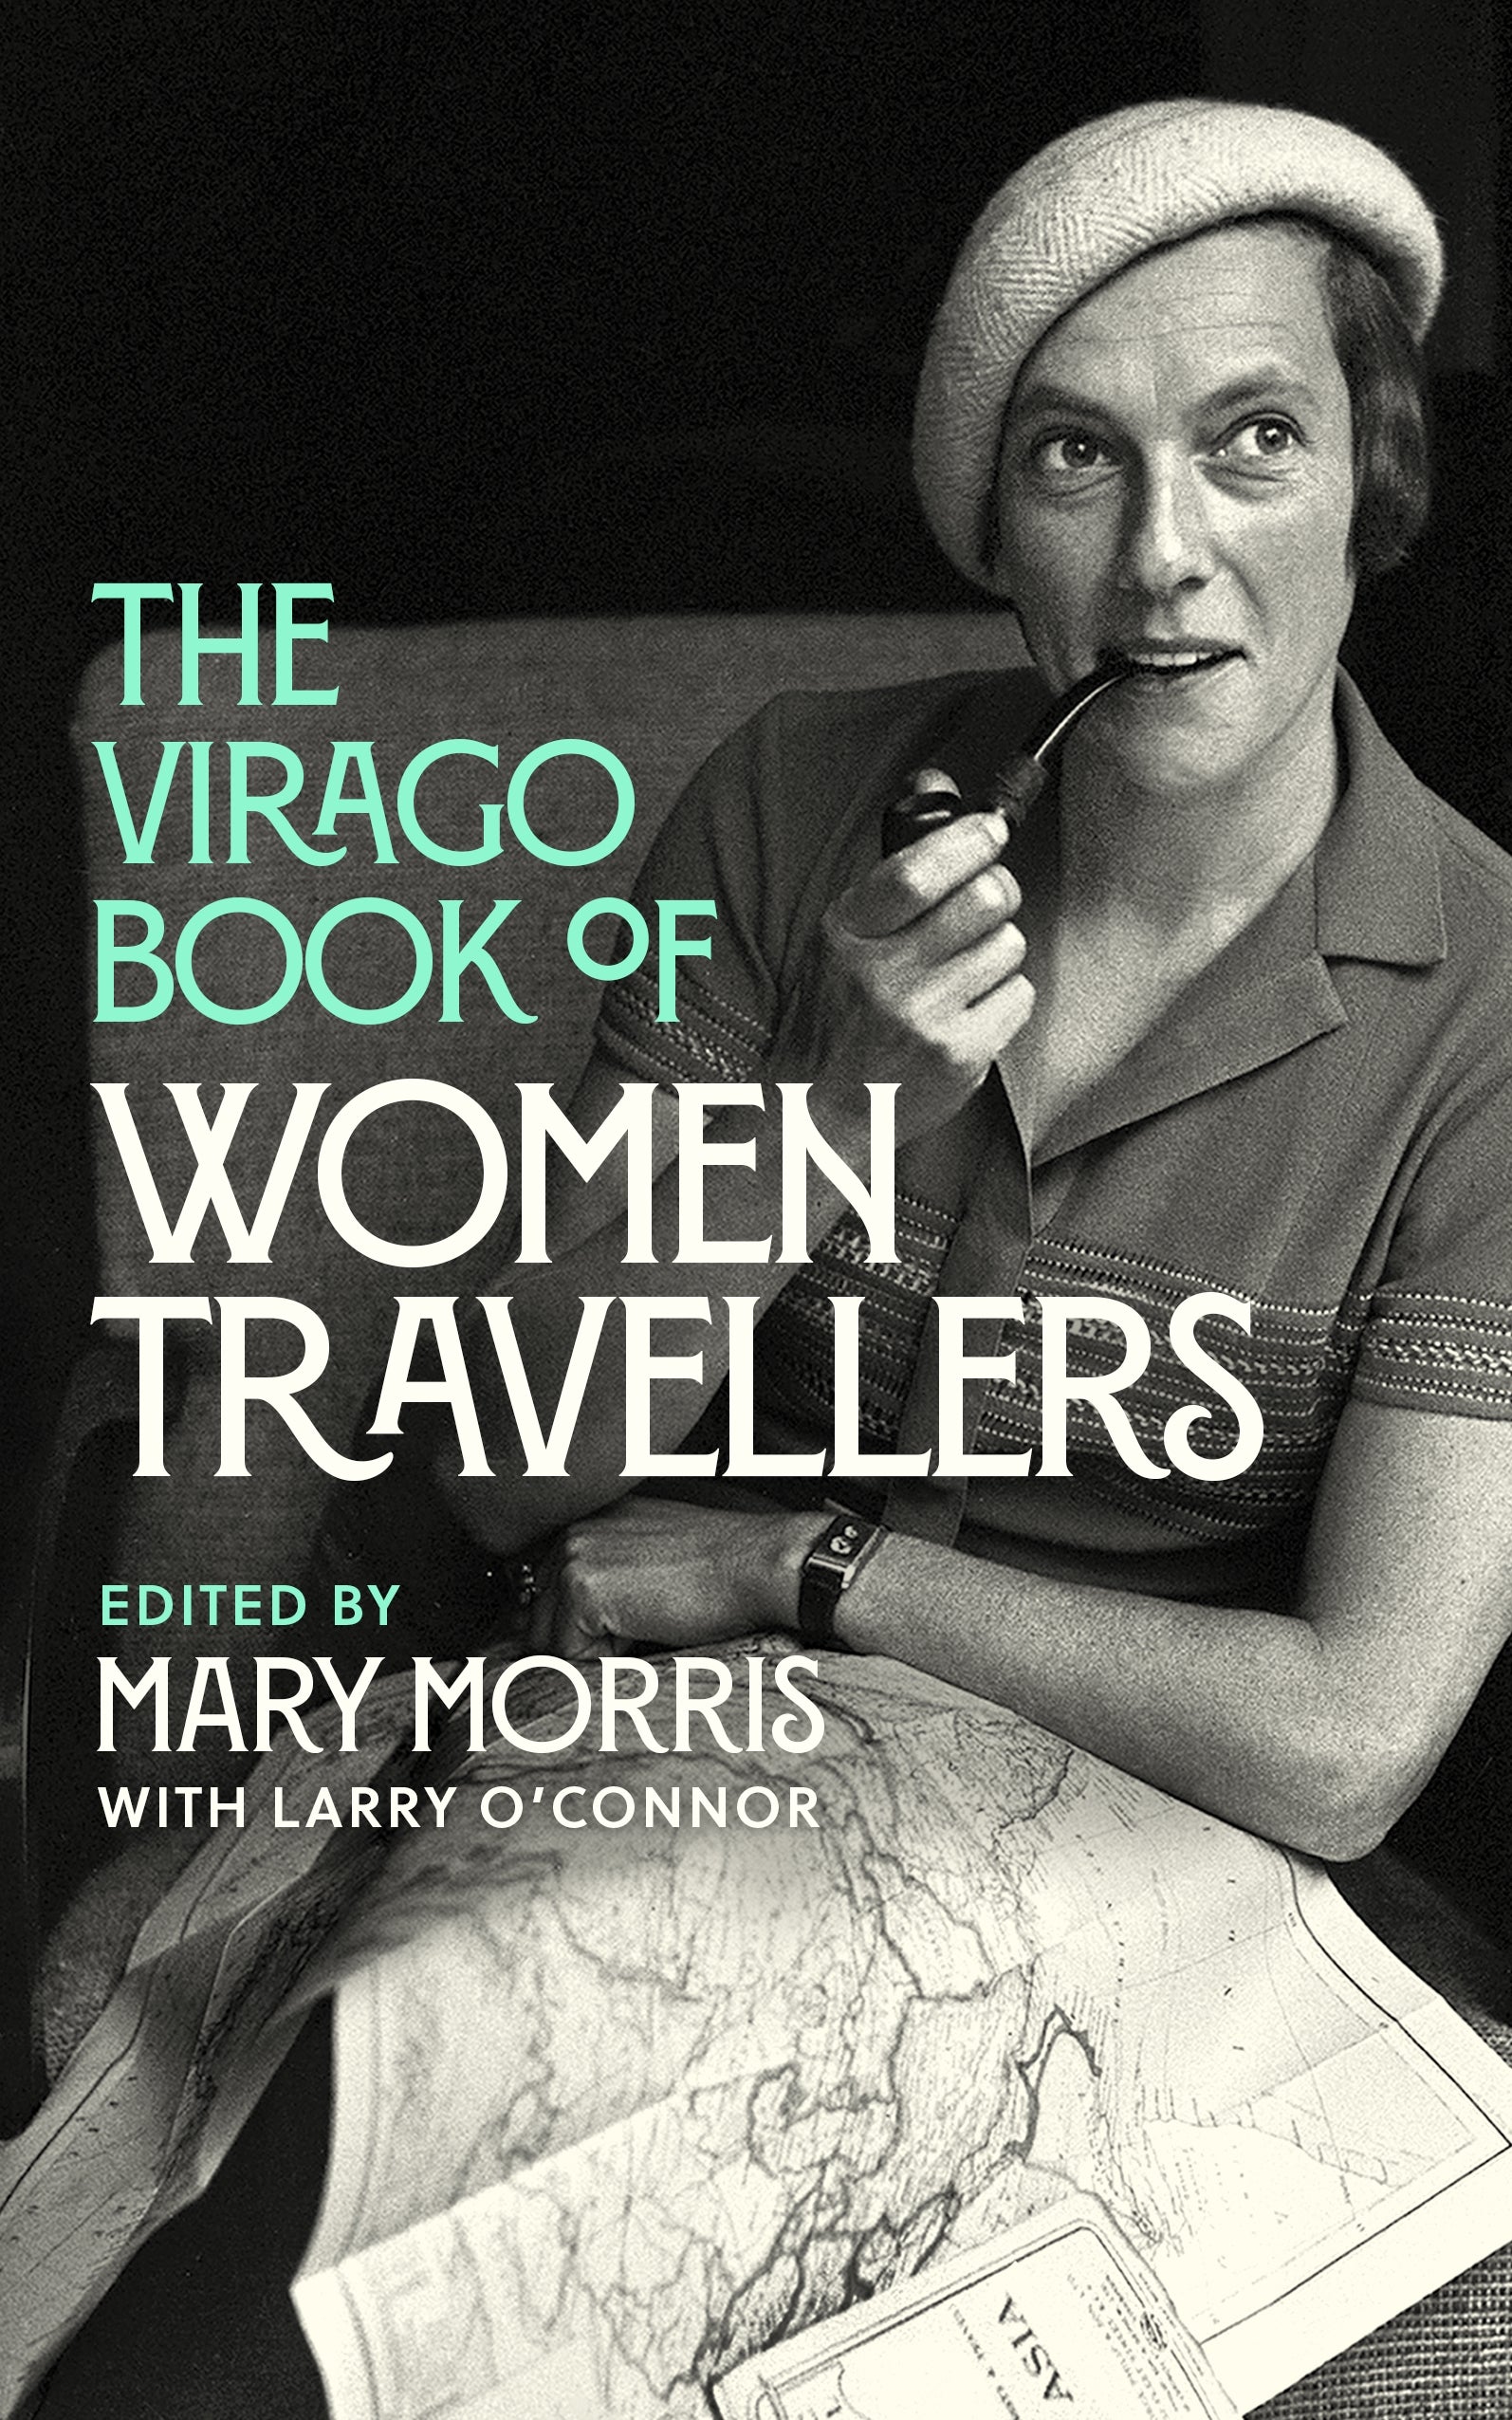 The Virago Book Of Women Travellers. by Mary Morris